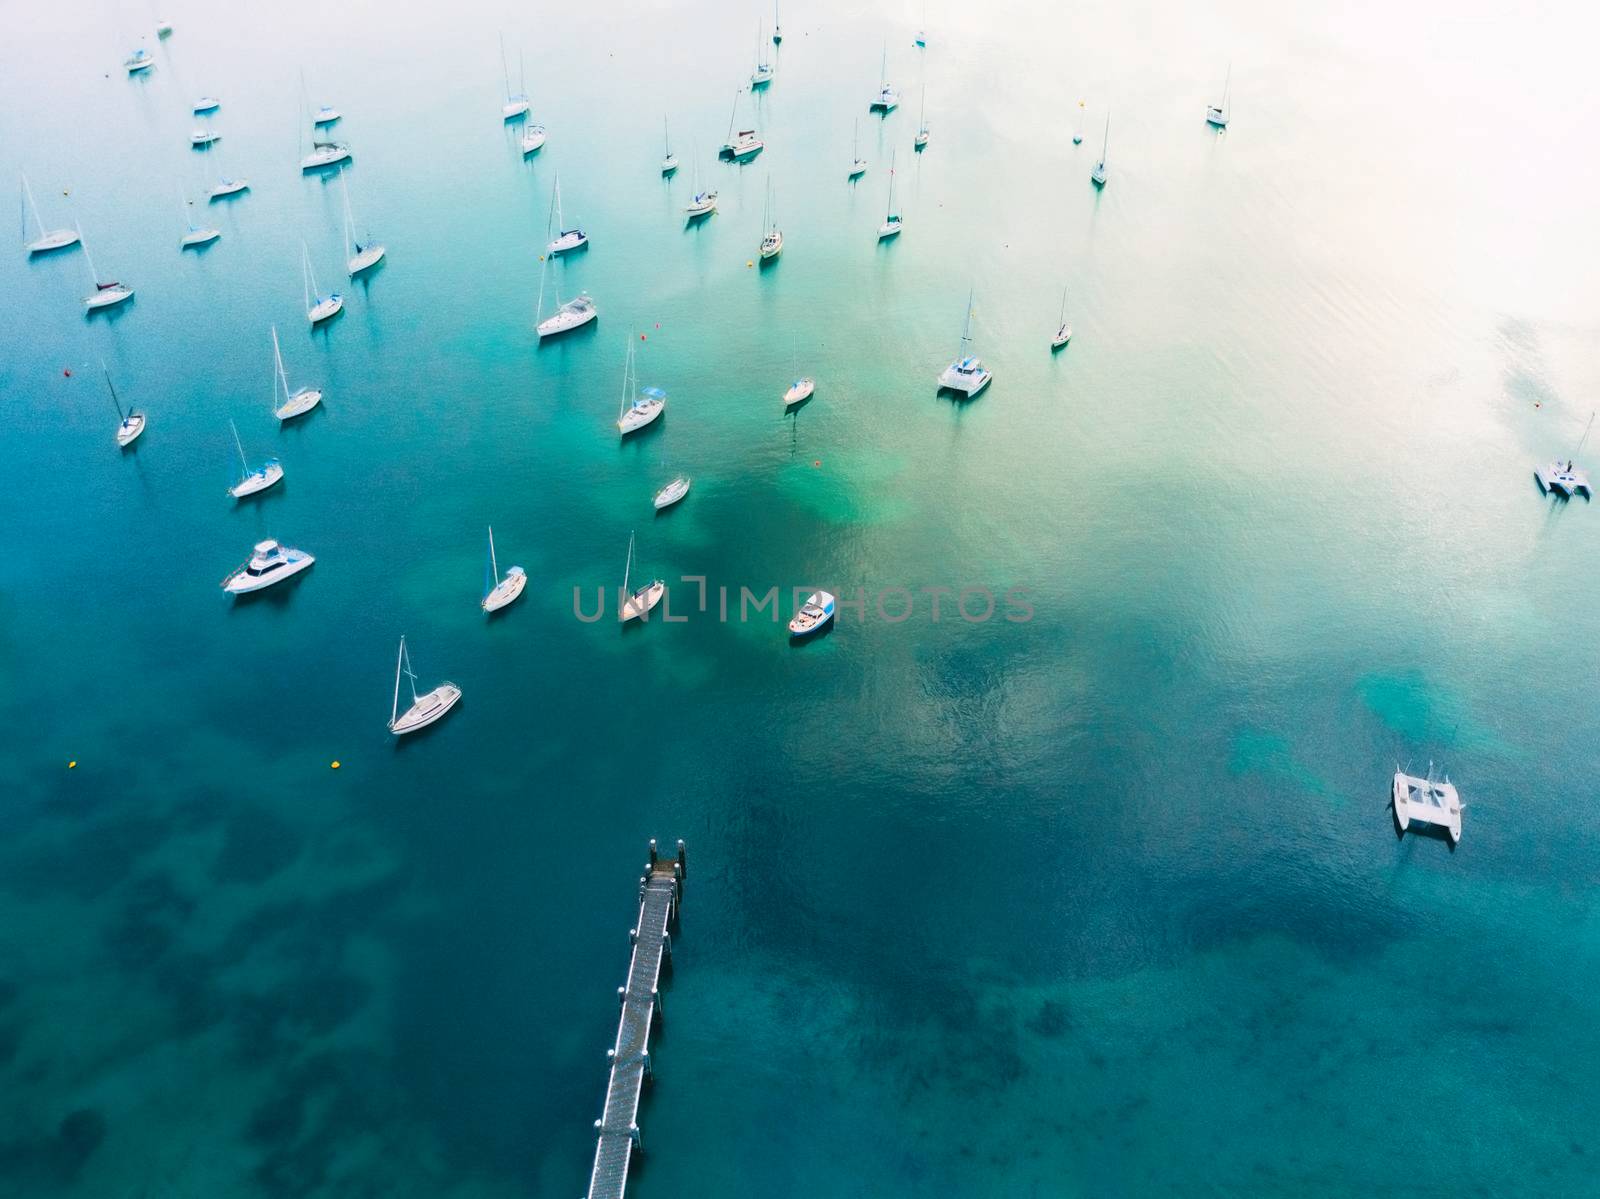 Yachts in the bay by lovleah